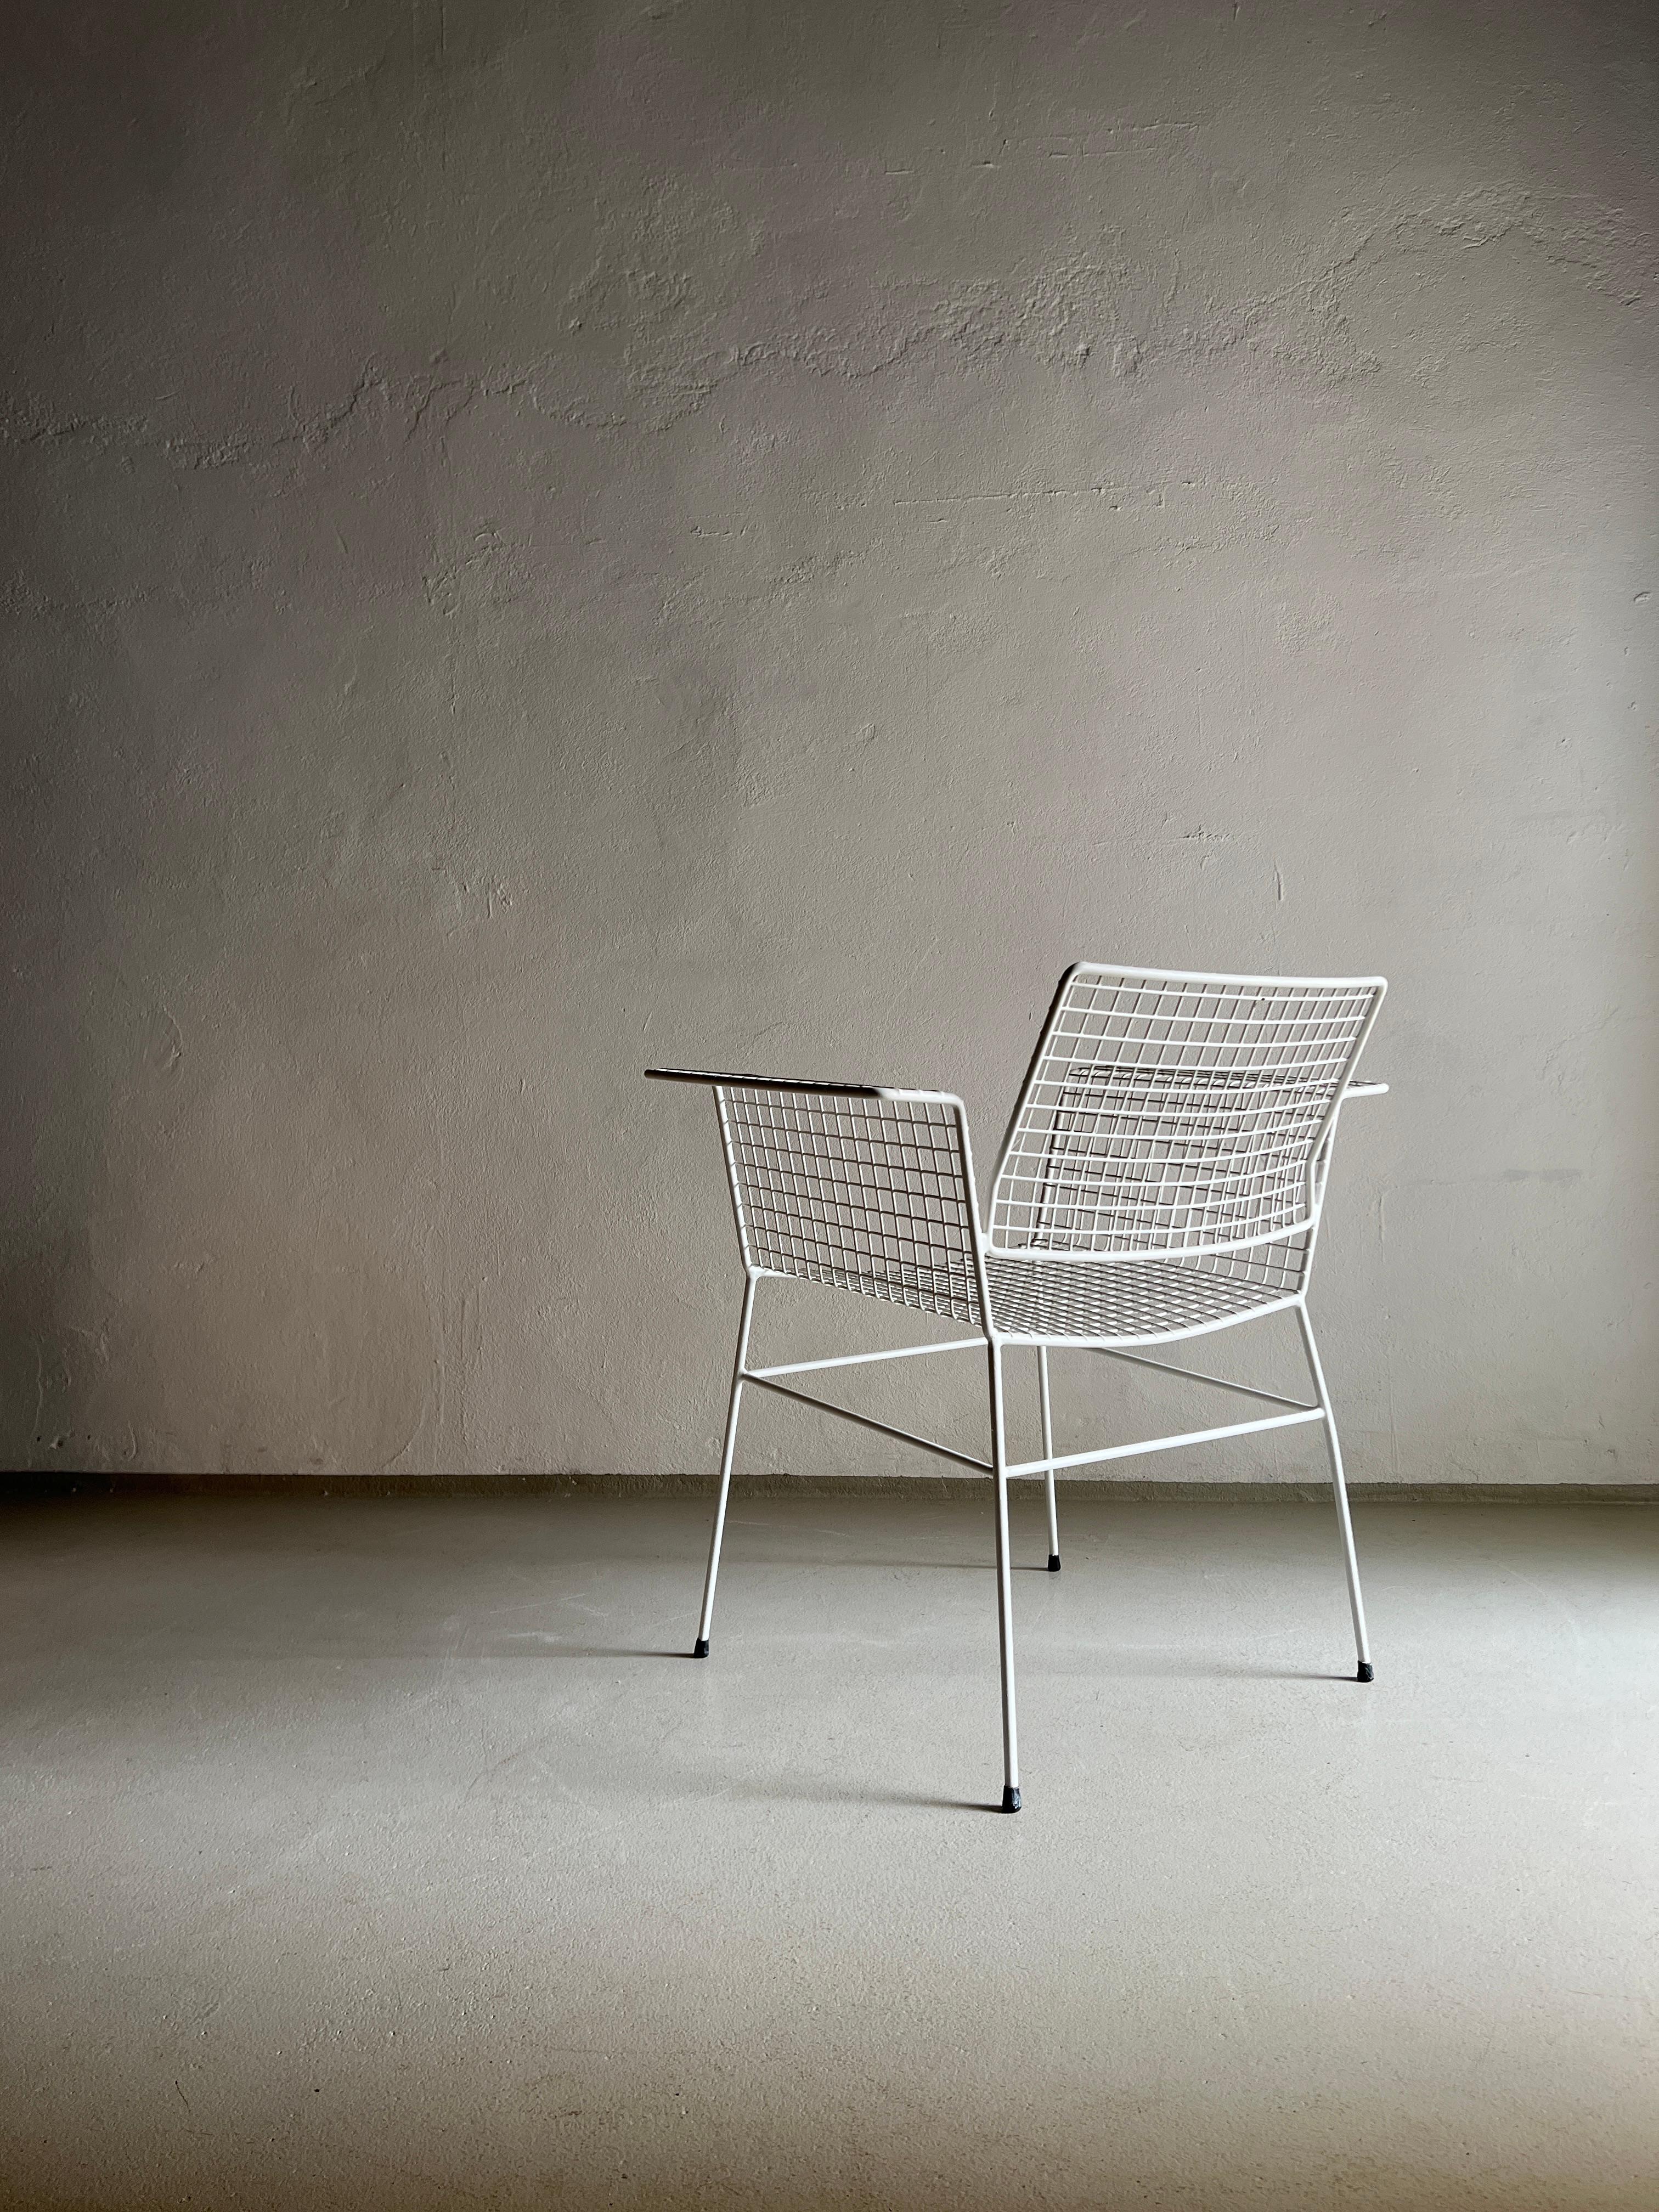 Cold-Painted White Metal Wire Chair from Erlau Germany, 1960s For Sale